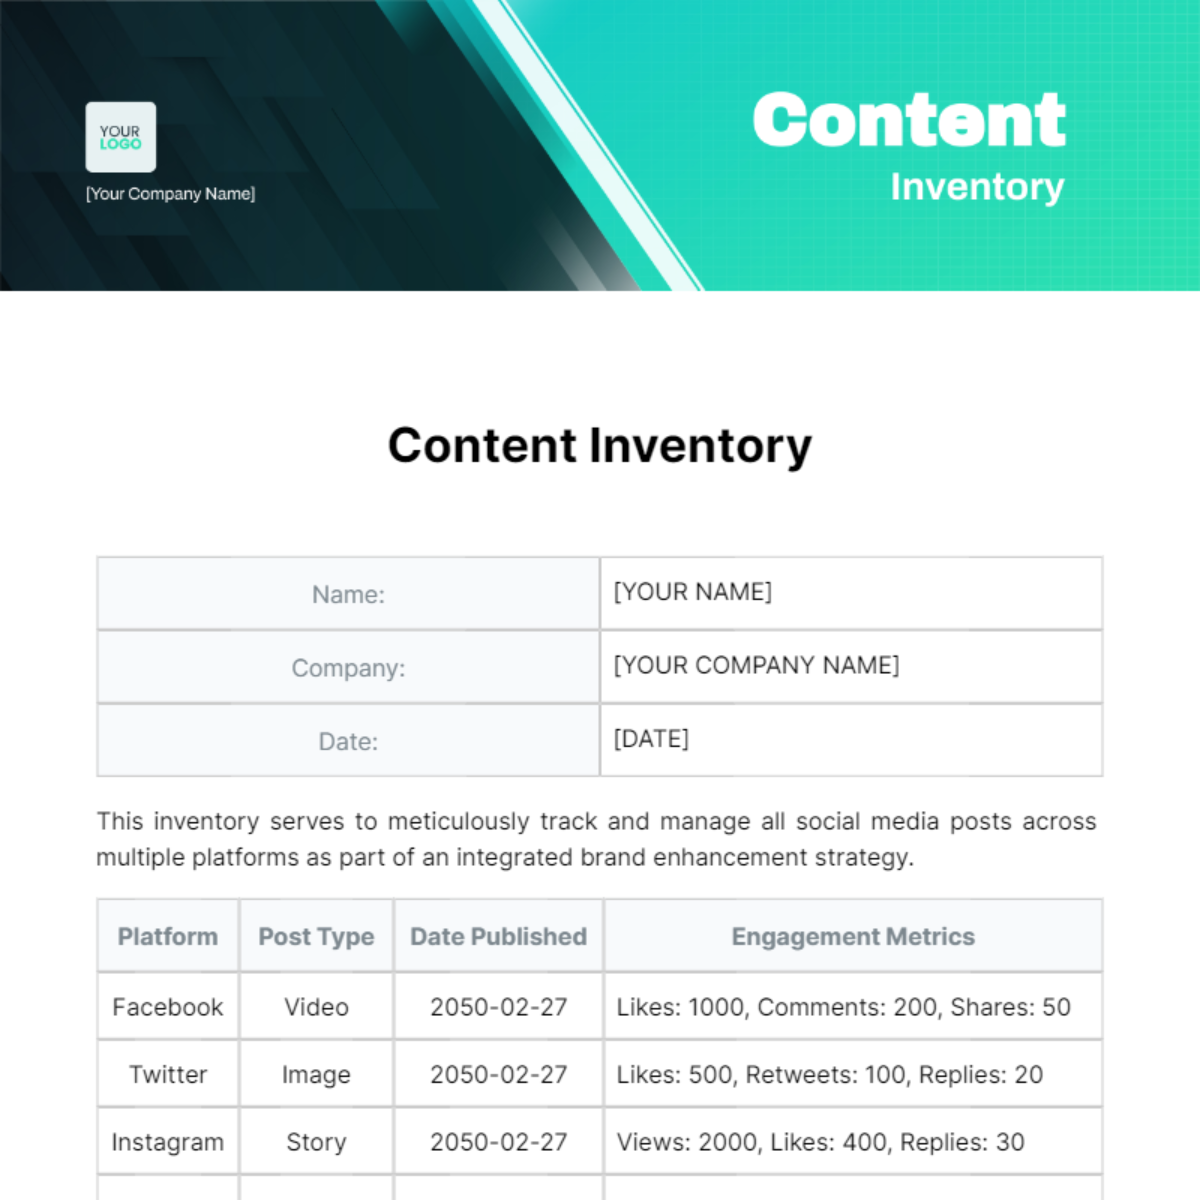 Content Inventory Template